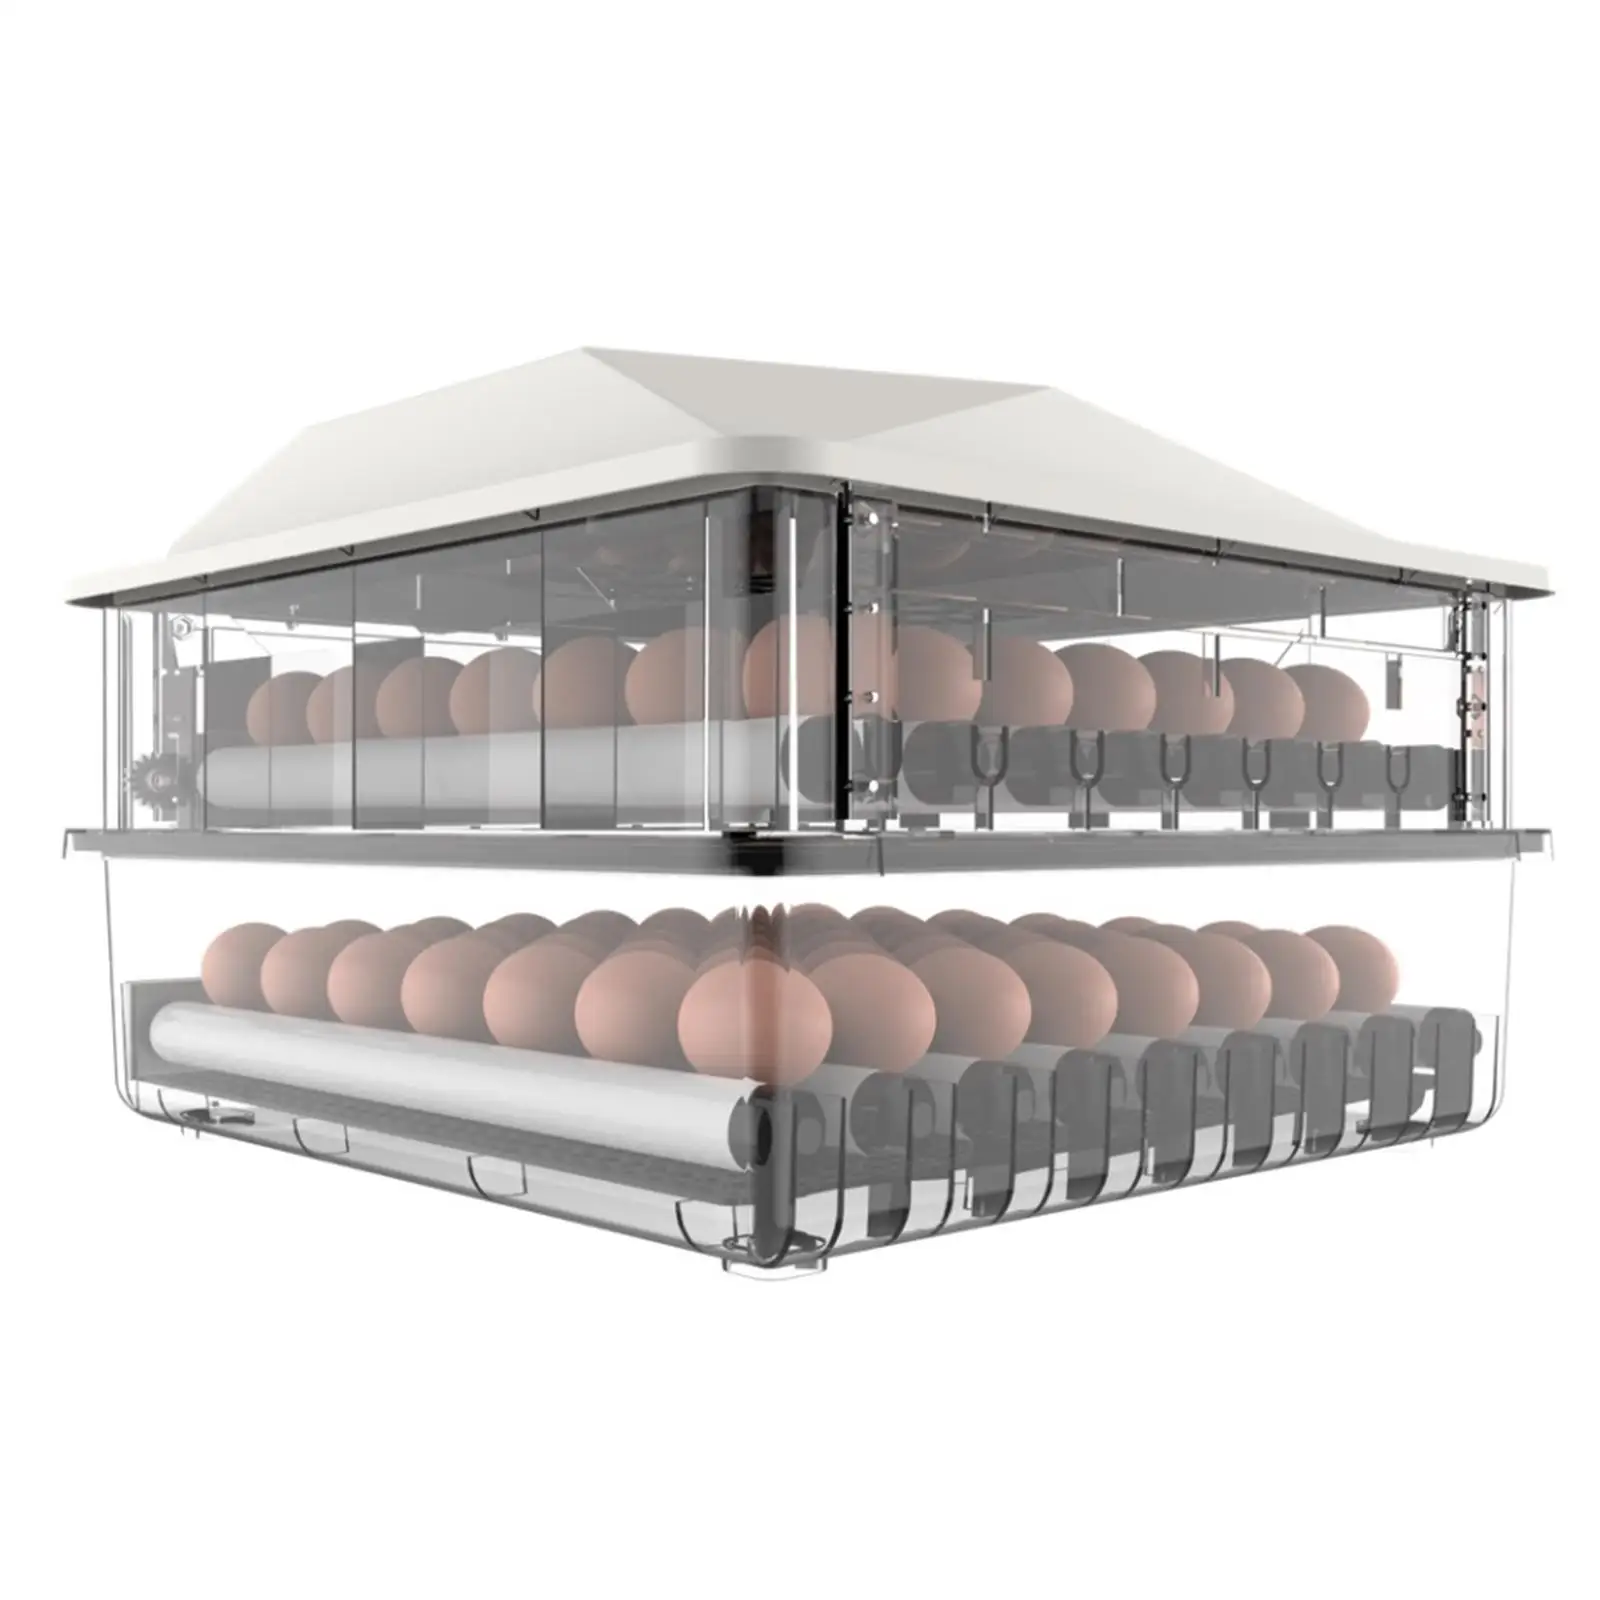 

Household Eggs Incubator Temp Humidity Control Poultry Incubator Electric Hatcher Machine for Hatching Chicks Birds Goose Eggs